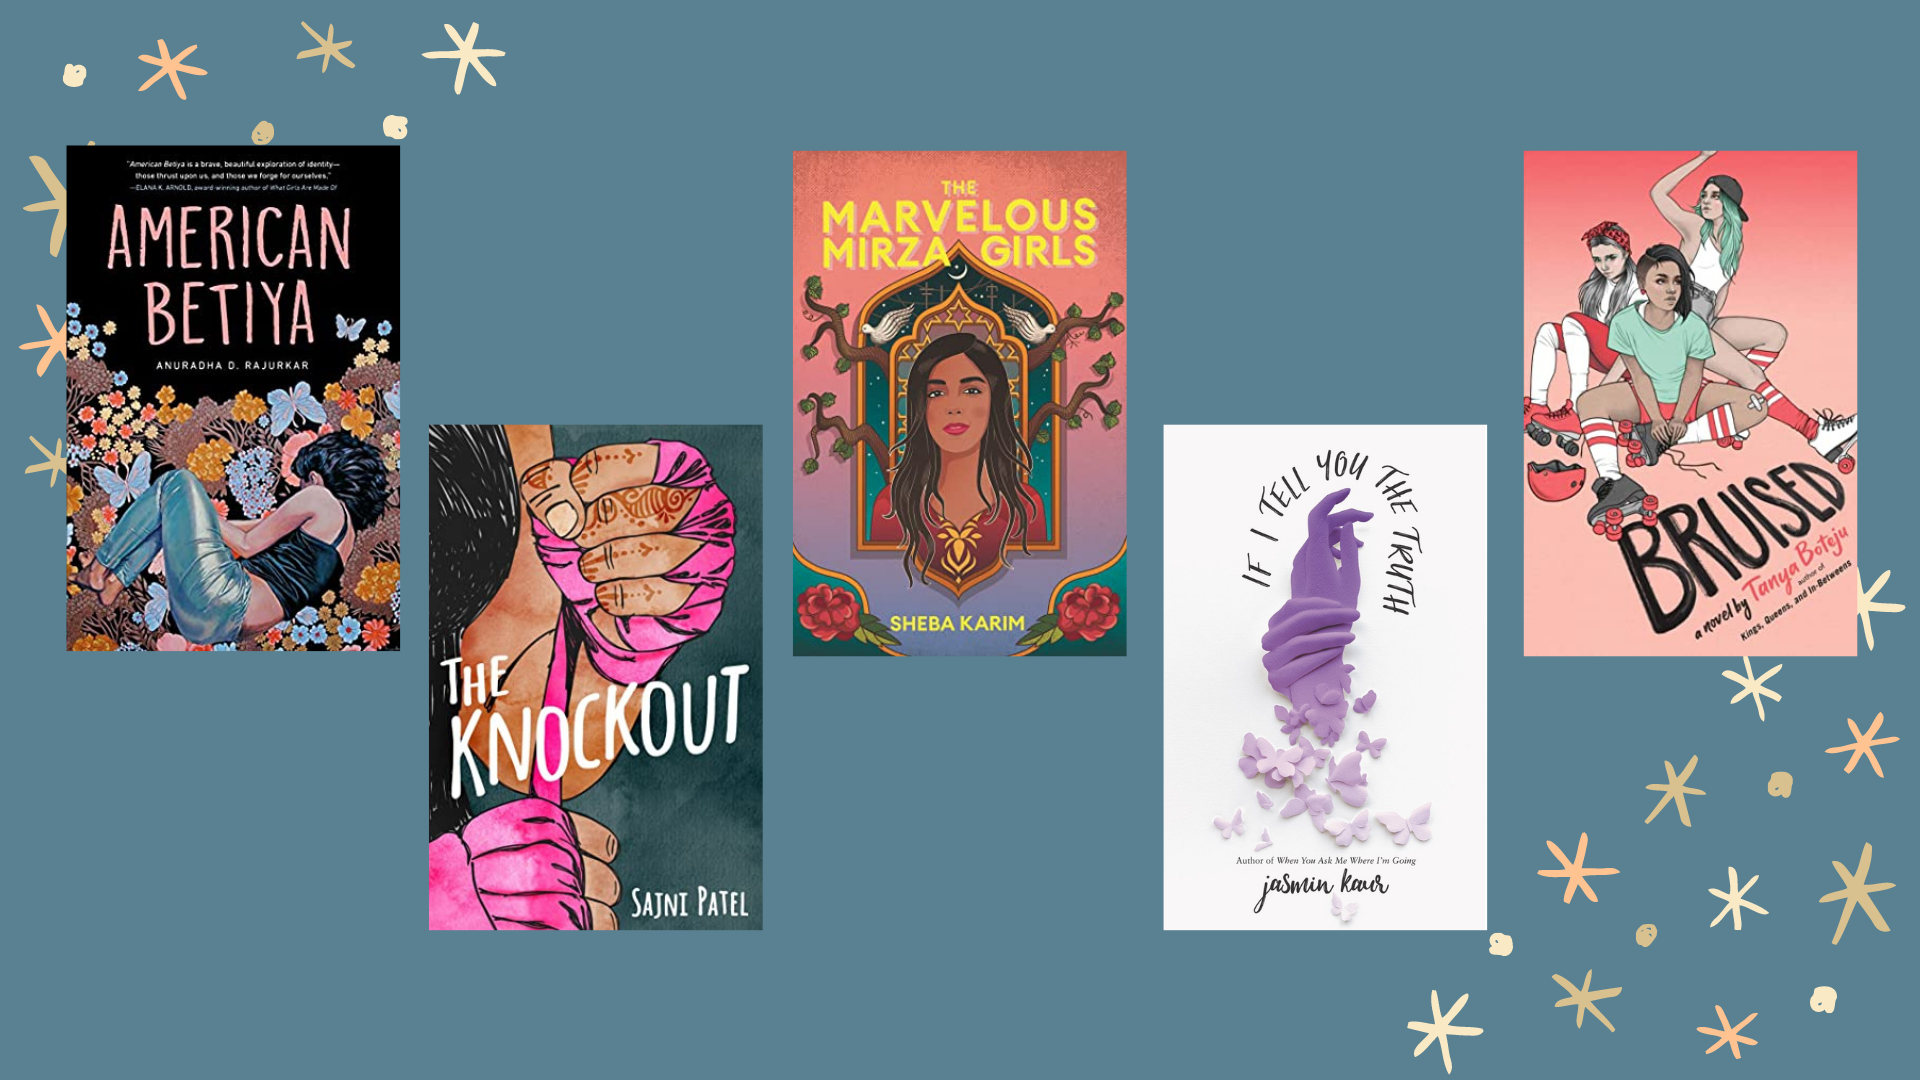 YA Contemporaries by South Asian Authors To Look Forward to in 2021